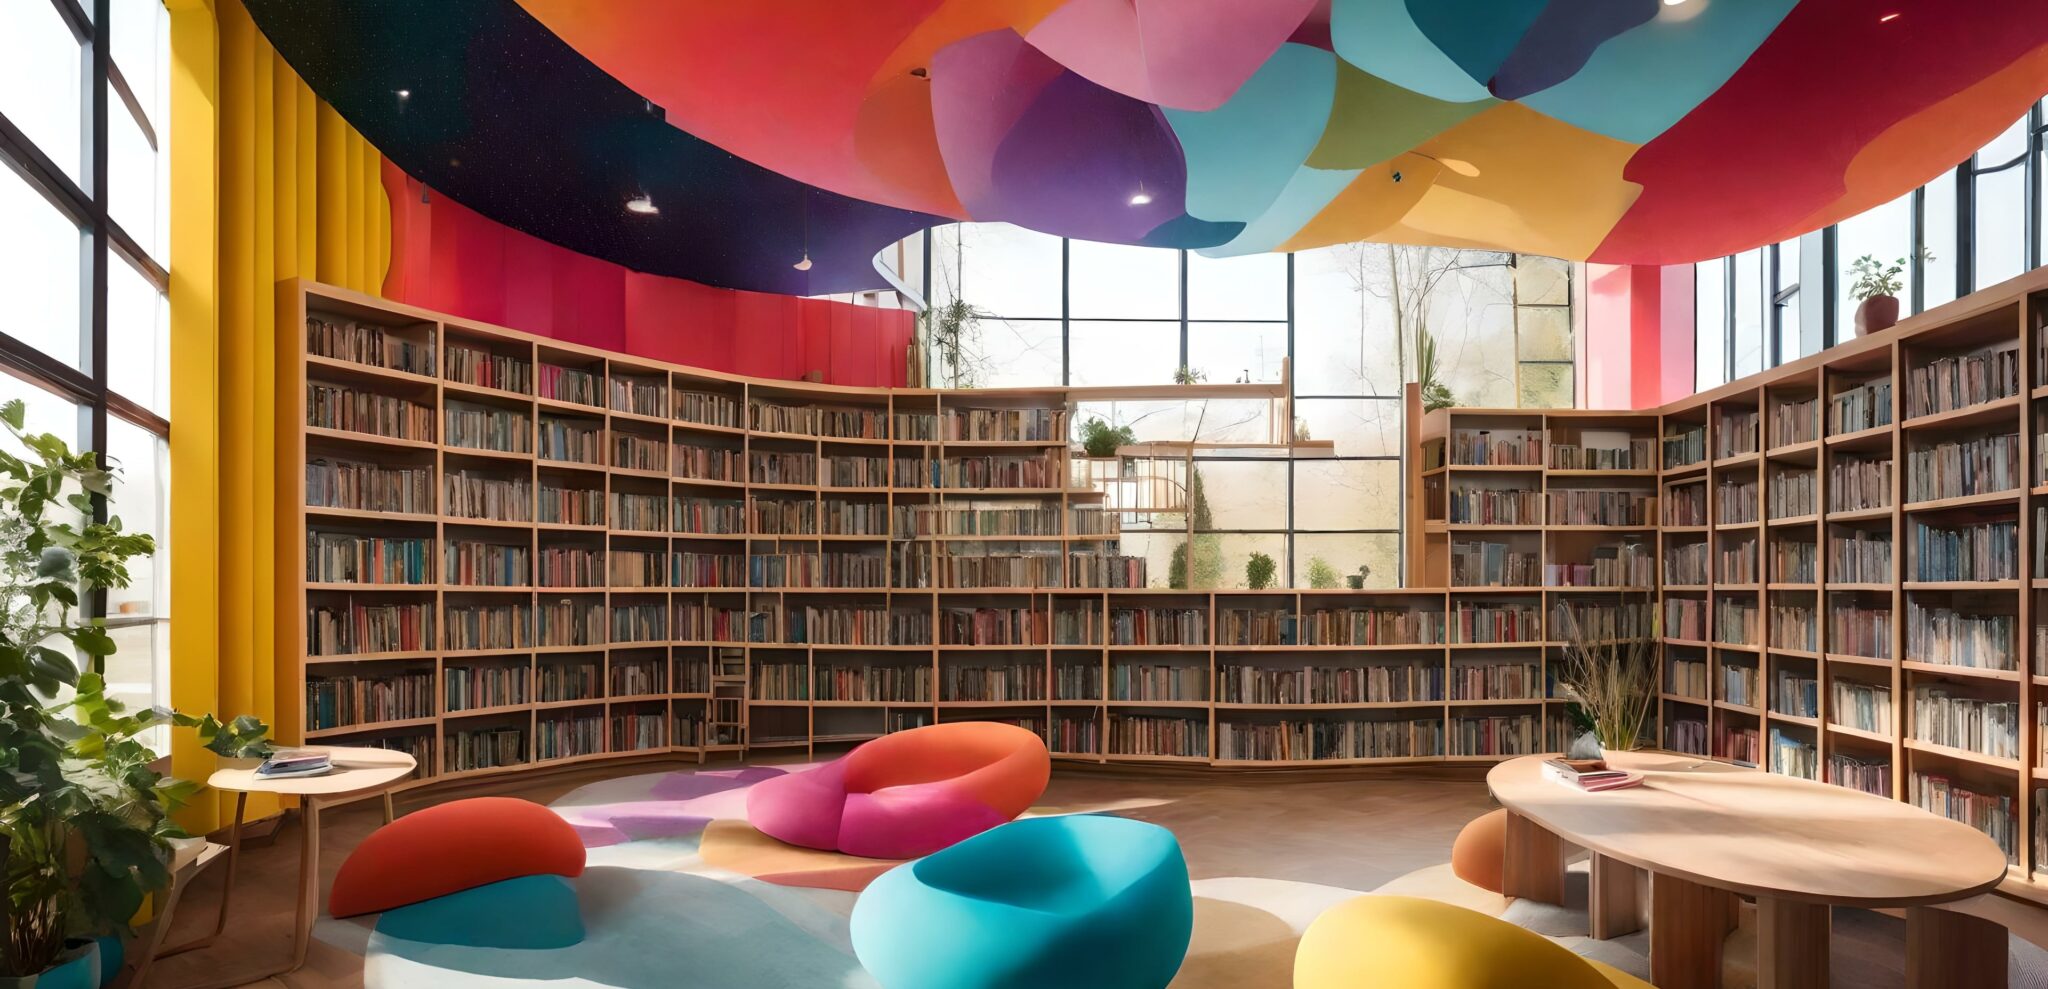 A vibrant library filled with lively chairs and bookshelves bursting with a rainbow of colors.